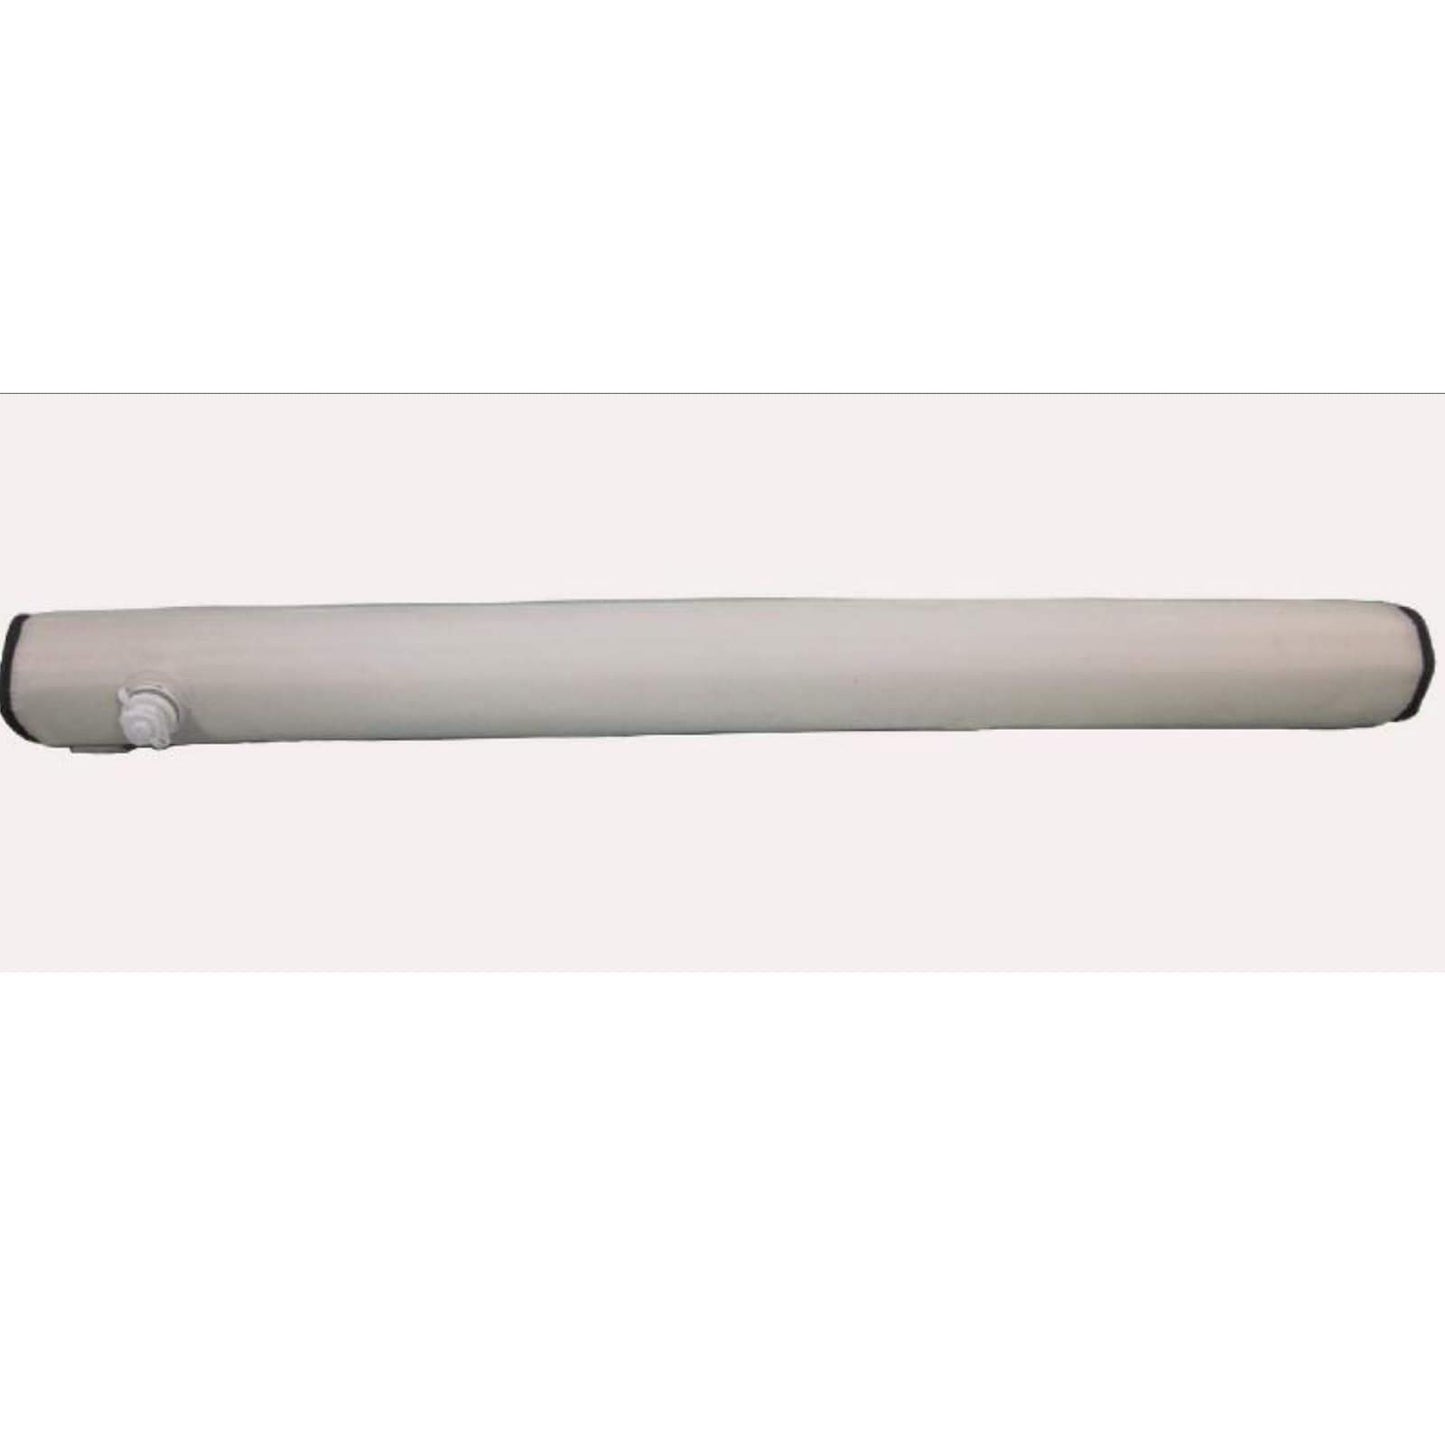 CampTech Inflatable Veranda Tubes for Inflatable Awnings (2019) made by CampTech. A Accessories sold by Quality Caravan Awnings